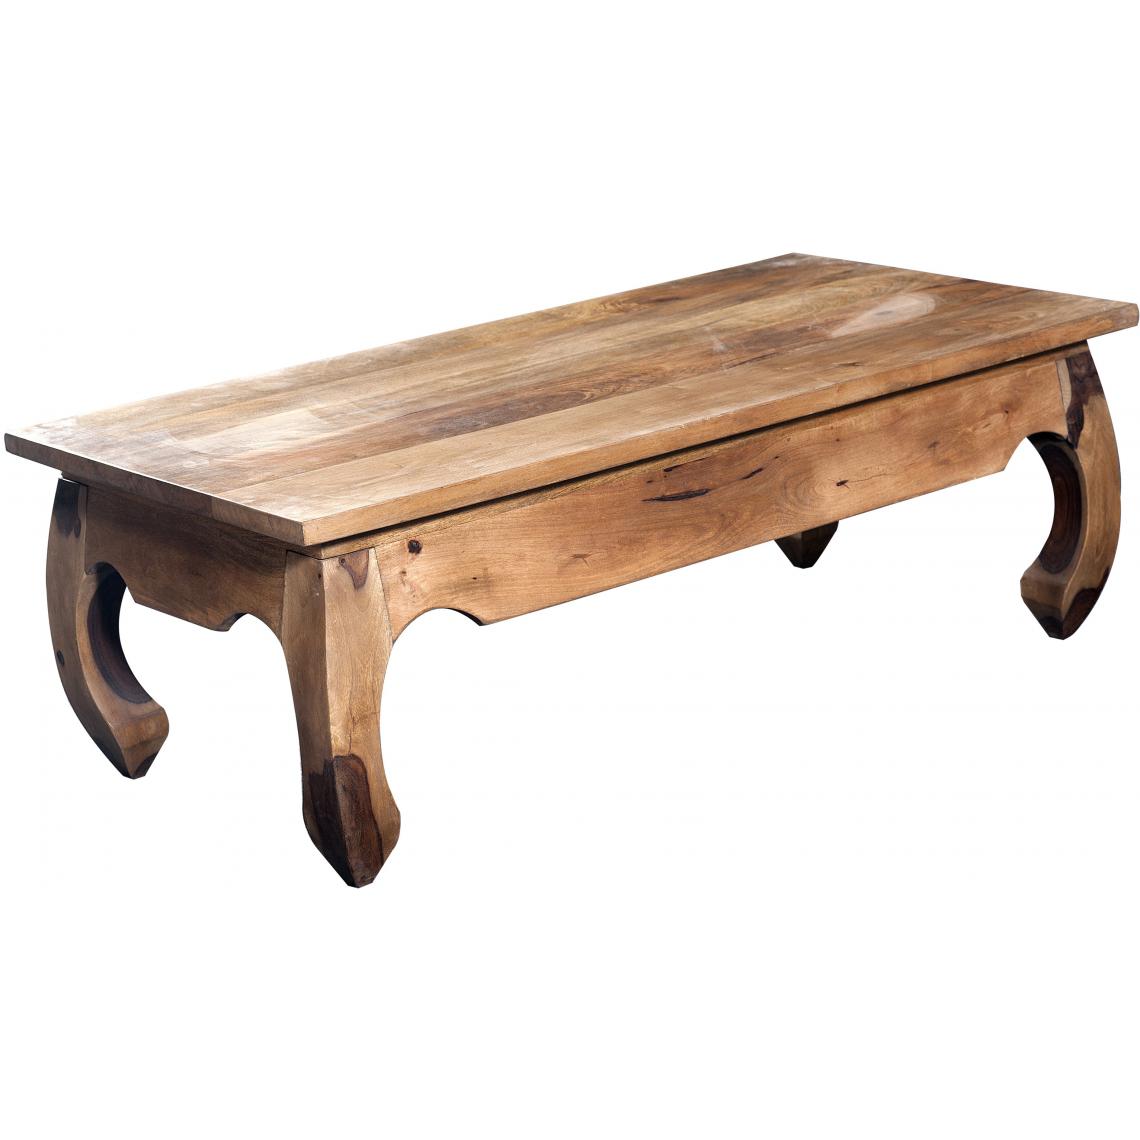 Table rectangulaire bois basse